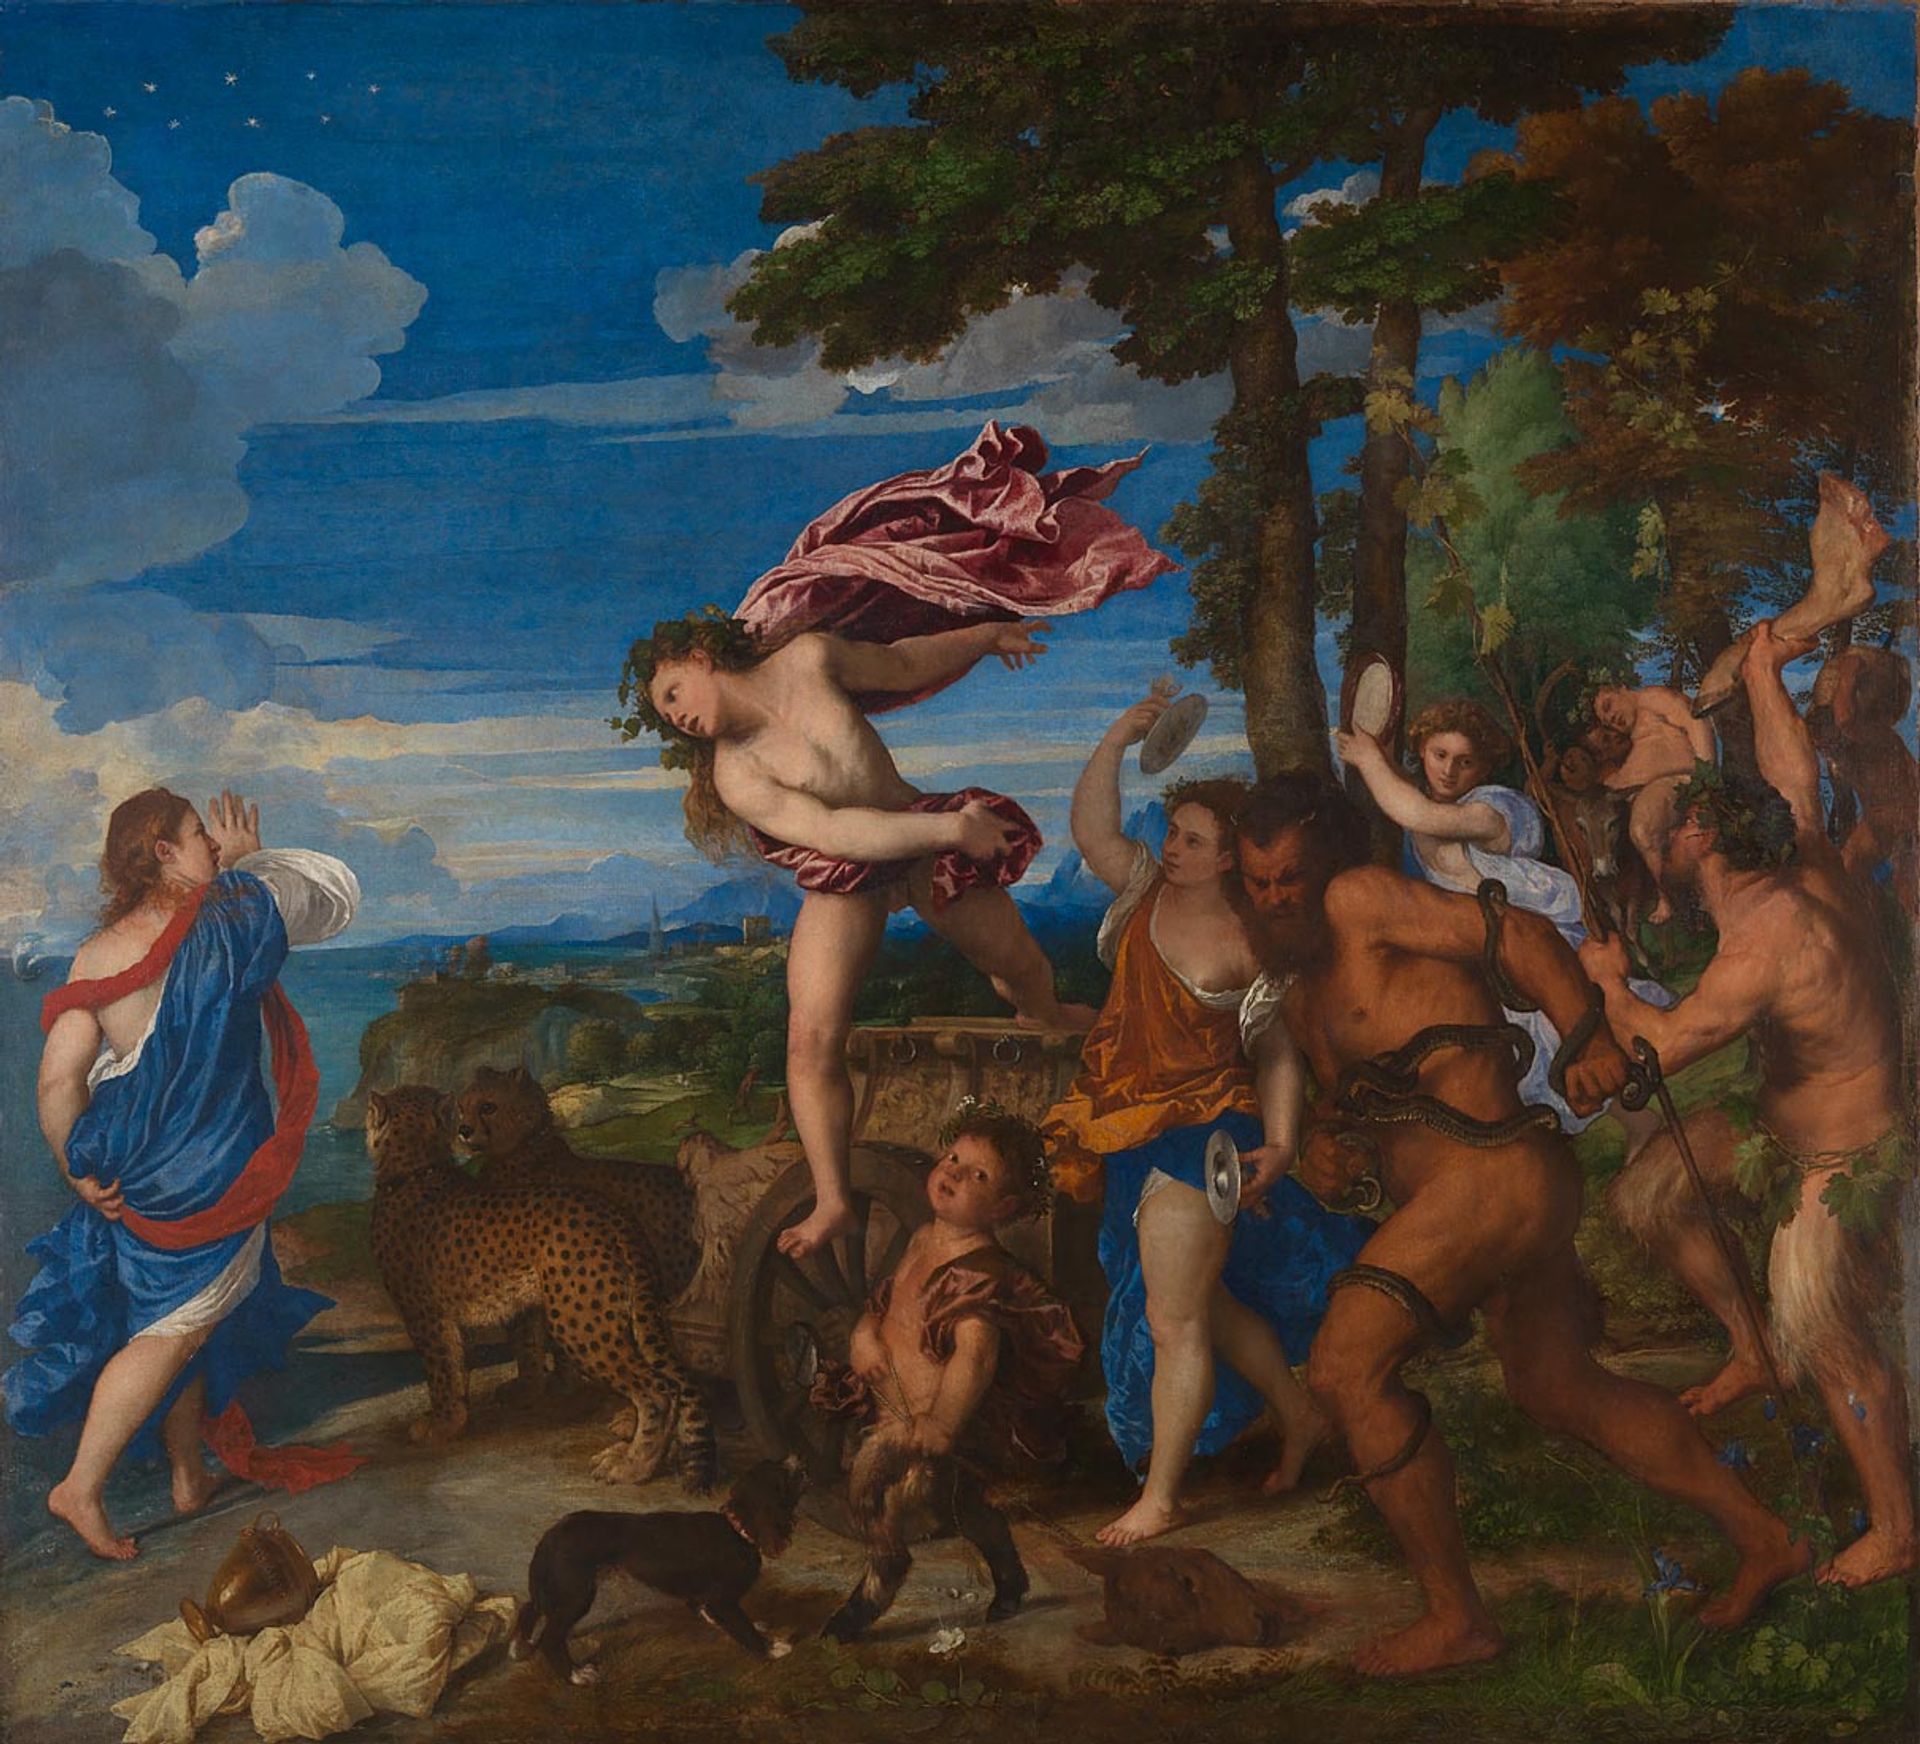 Titian's Bacchus and Ariadne (1520-23), the subject of one of the winning essays The National Gallery, London